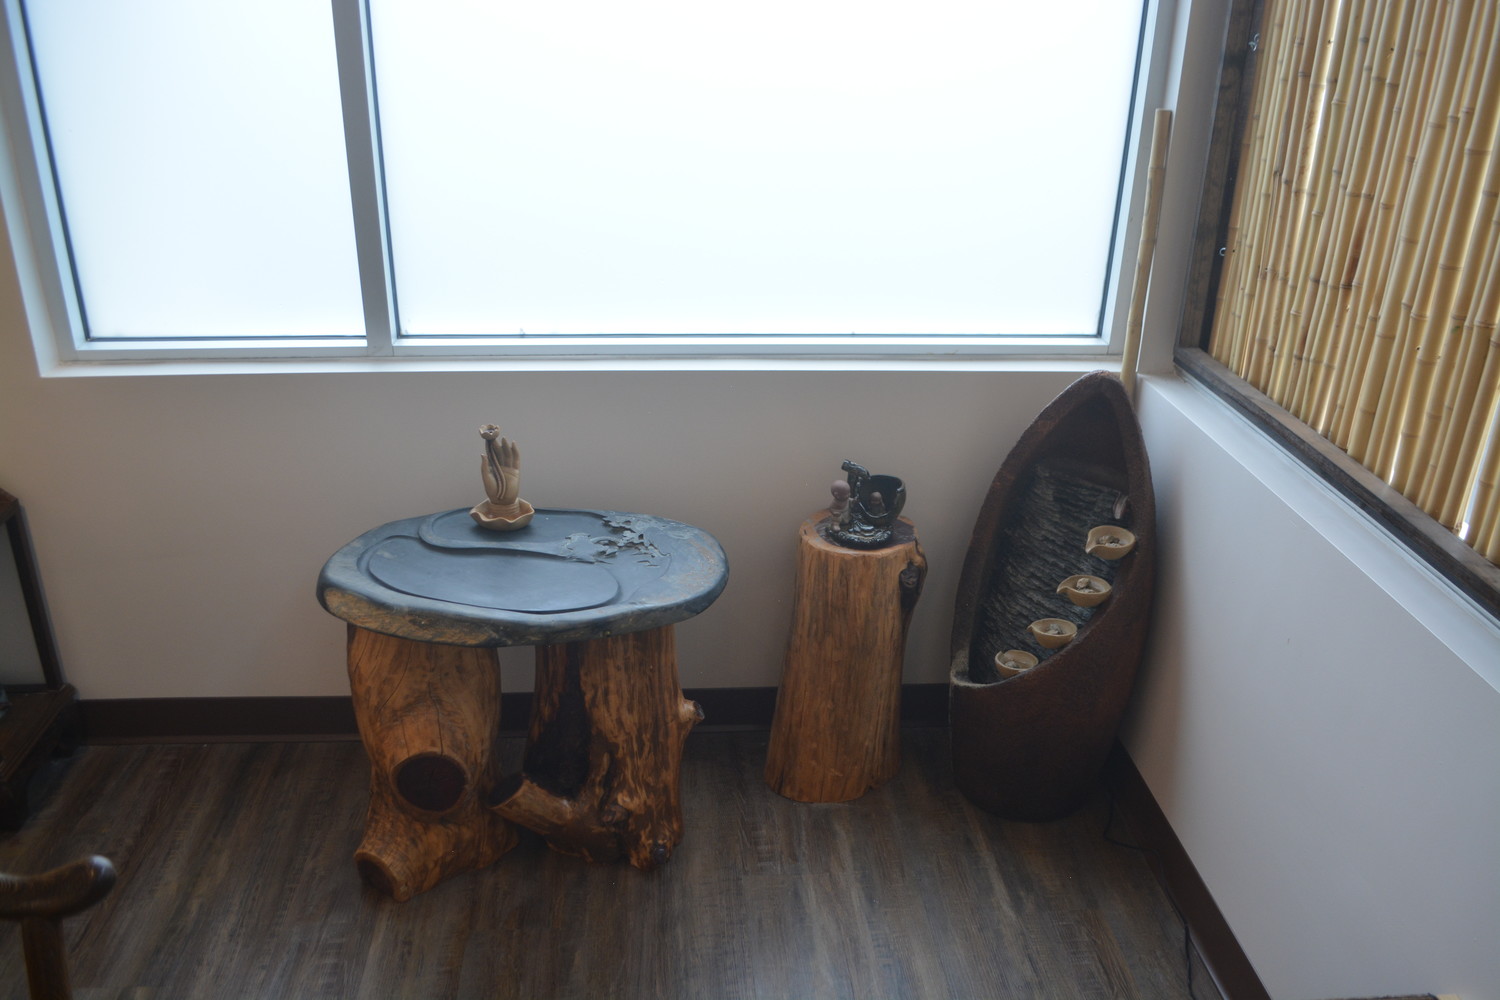 The Zen Room allows customers to enjoy a quiet room for meditation and reading.